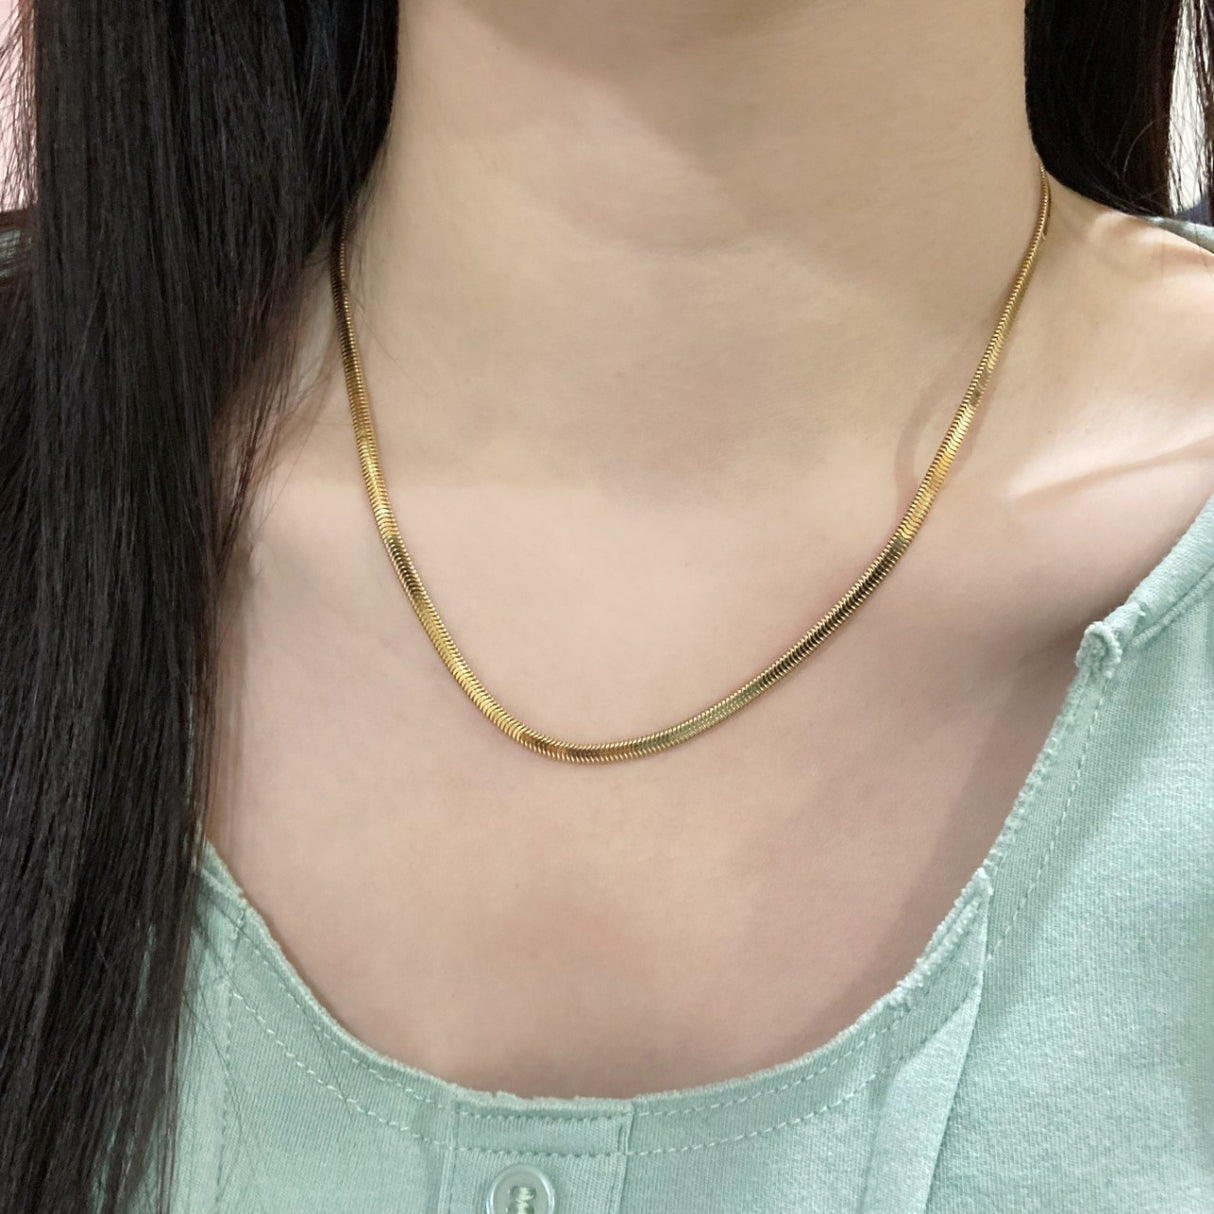 Made in Japan, the explosive soft snake bone chain can be folded 3.4mm to 38➕5cm and can be adjusted to have a sense of presence. The explosive weight is 9.7g.